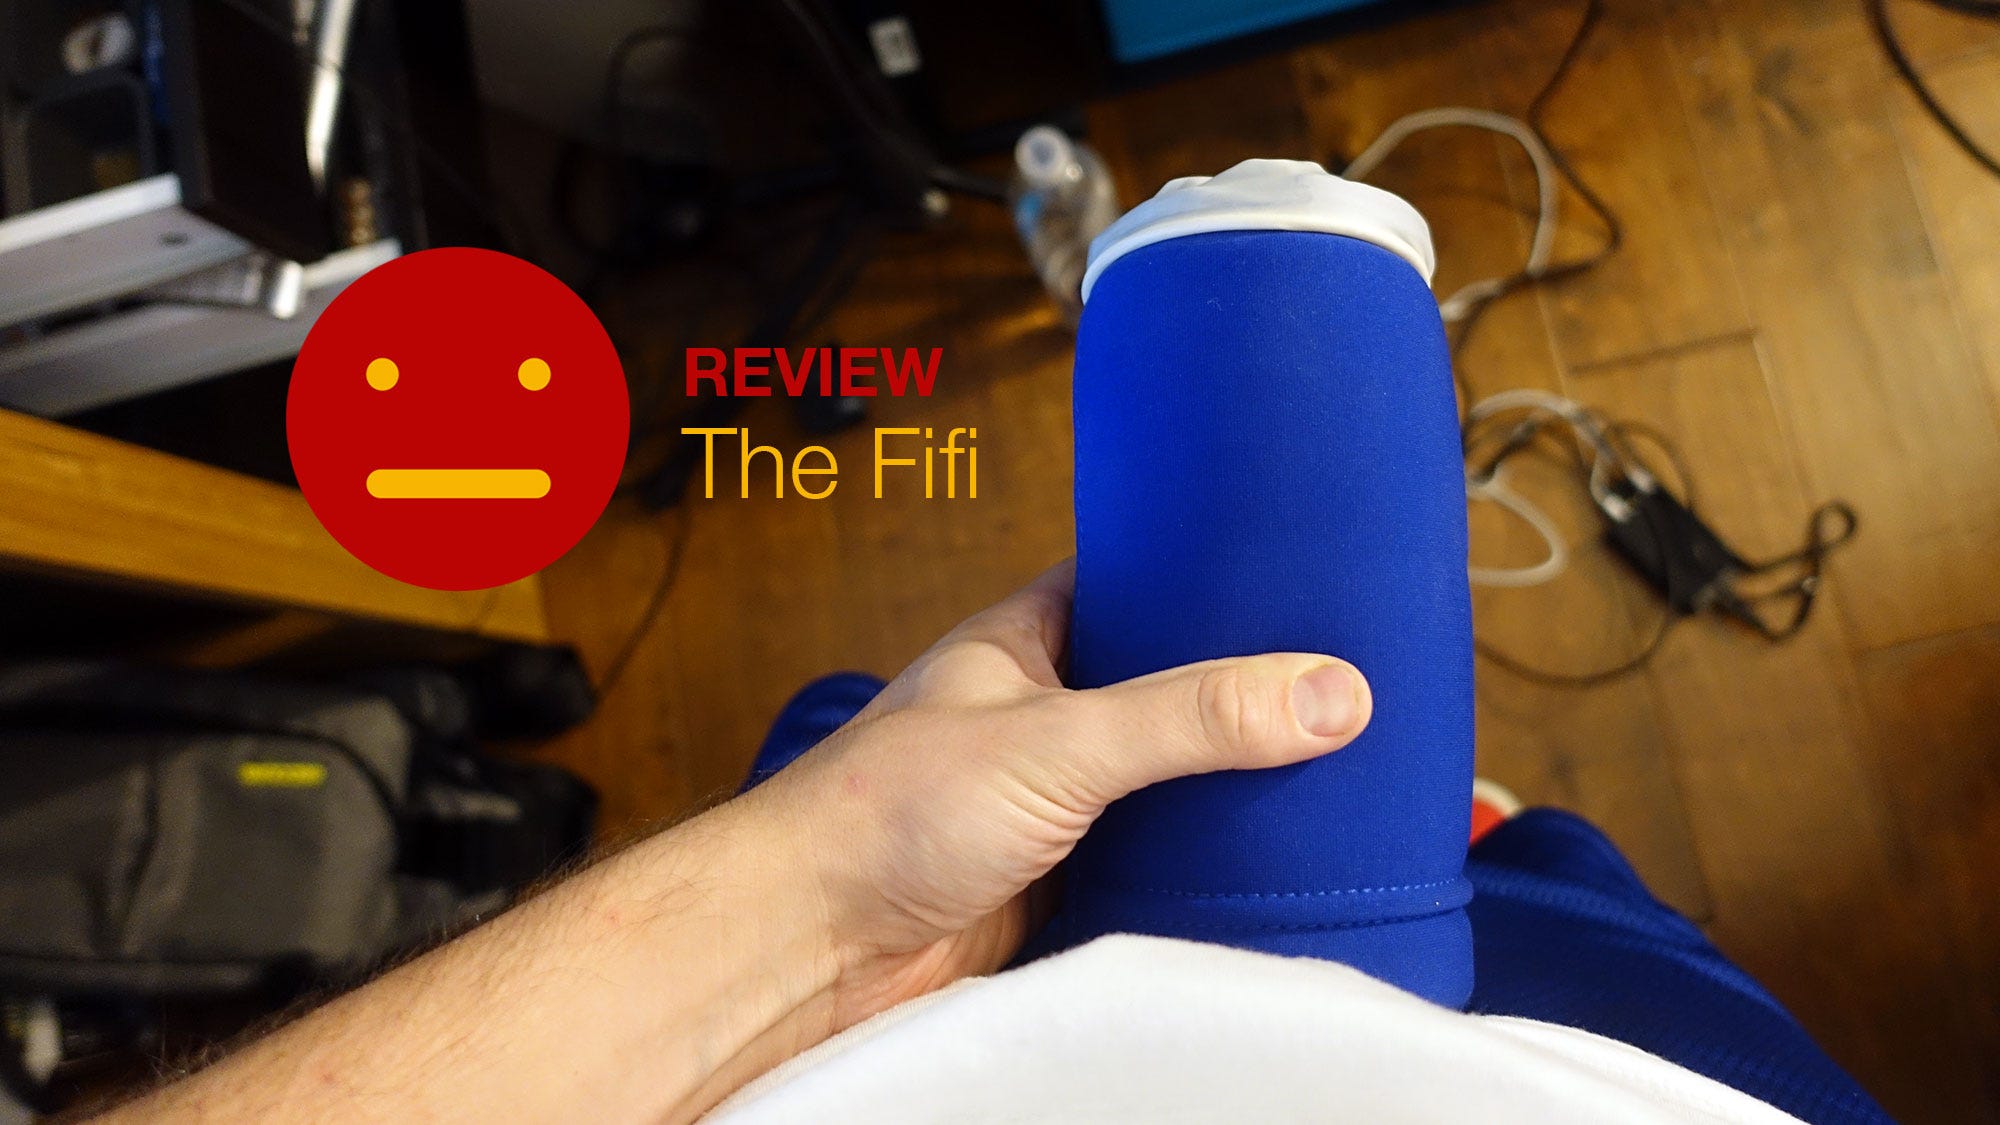 Review The Fifi Male Pleasure Device by Adam Dachis Awkward Human pic